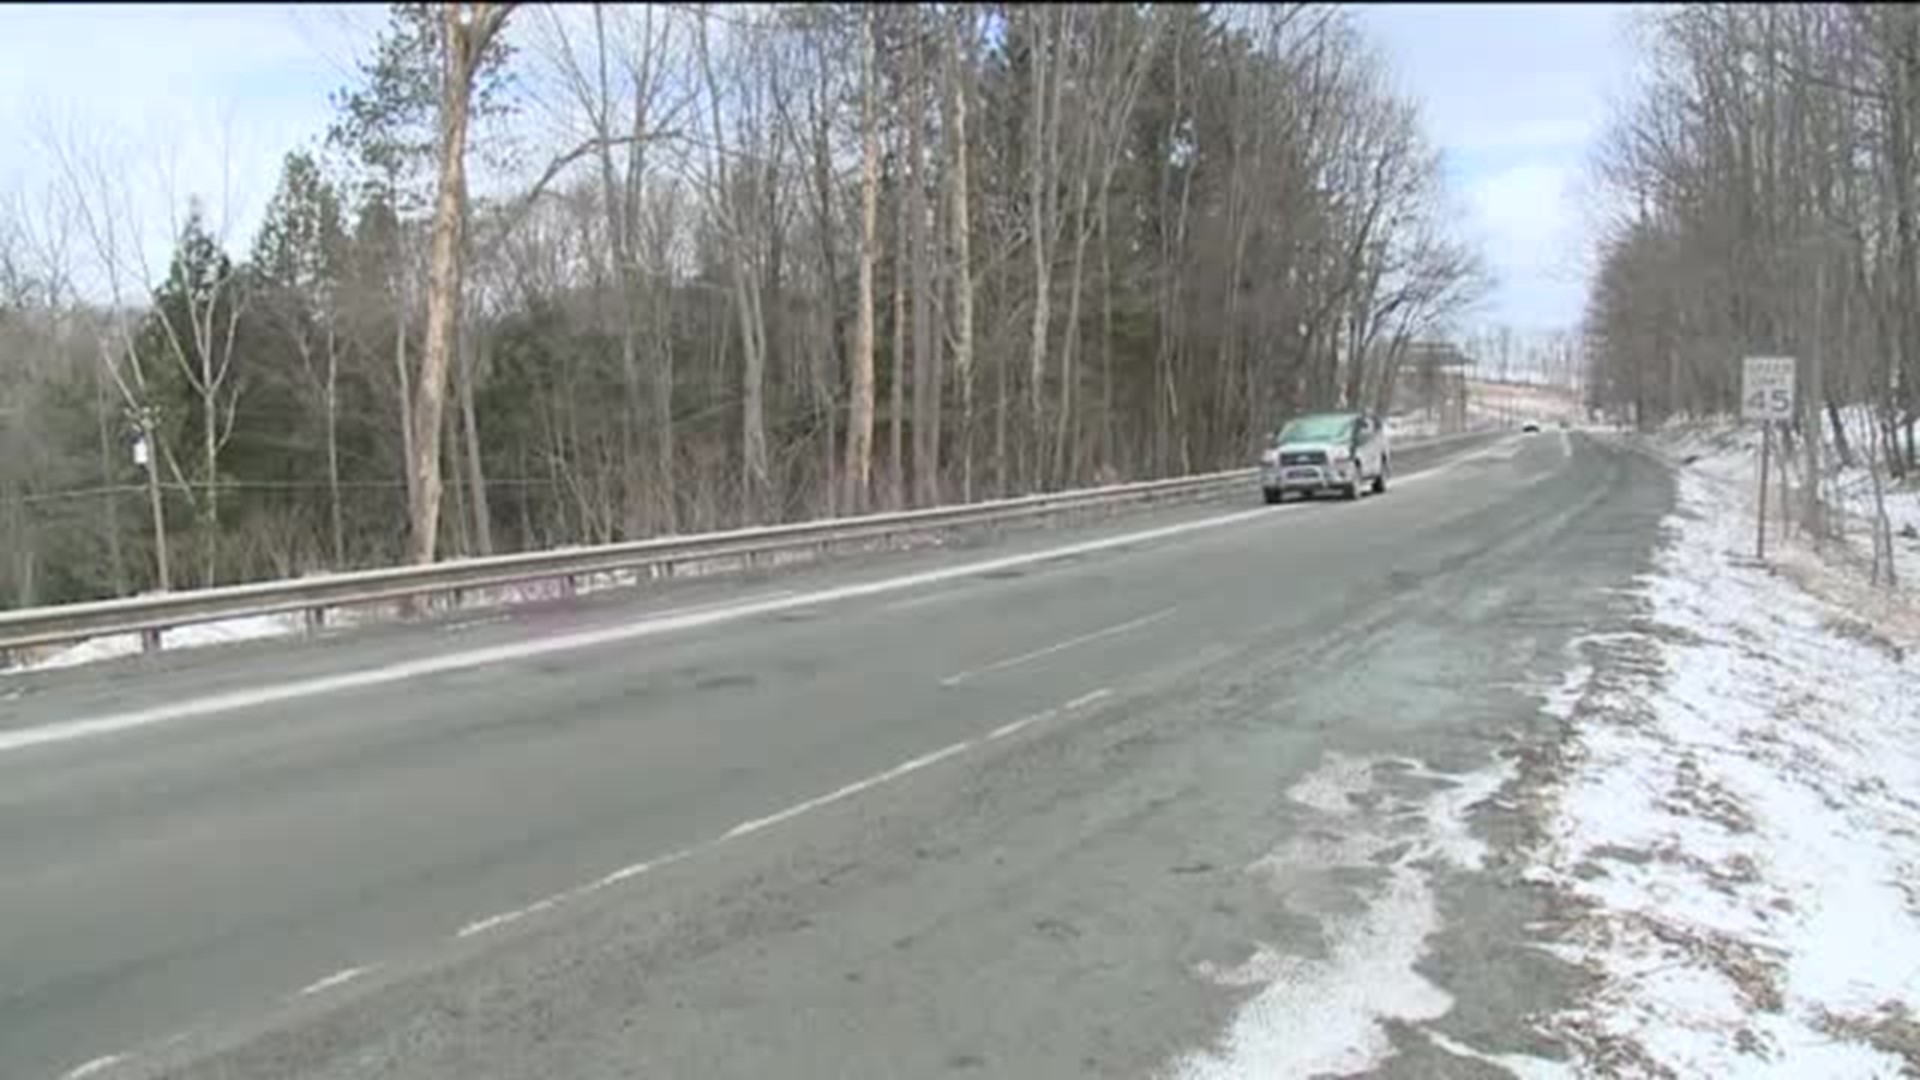 Repairs Needed on Deteriorating Road in Susquehanna County